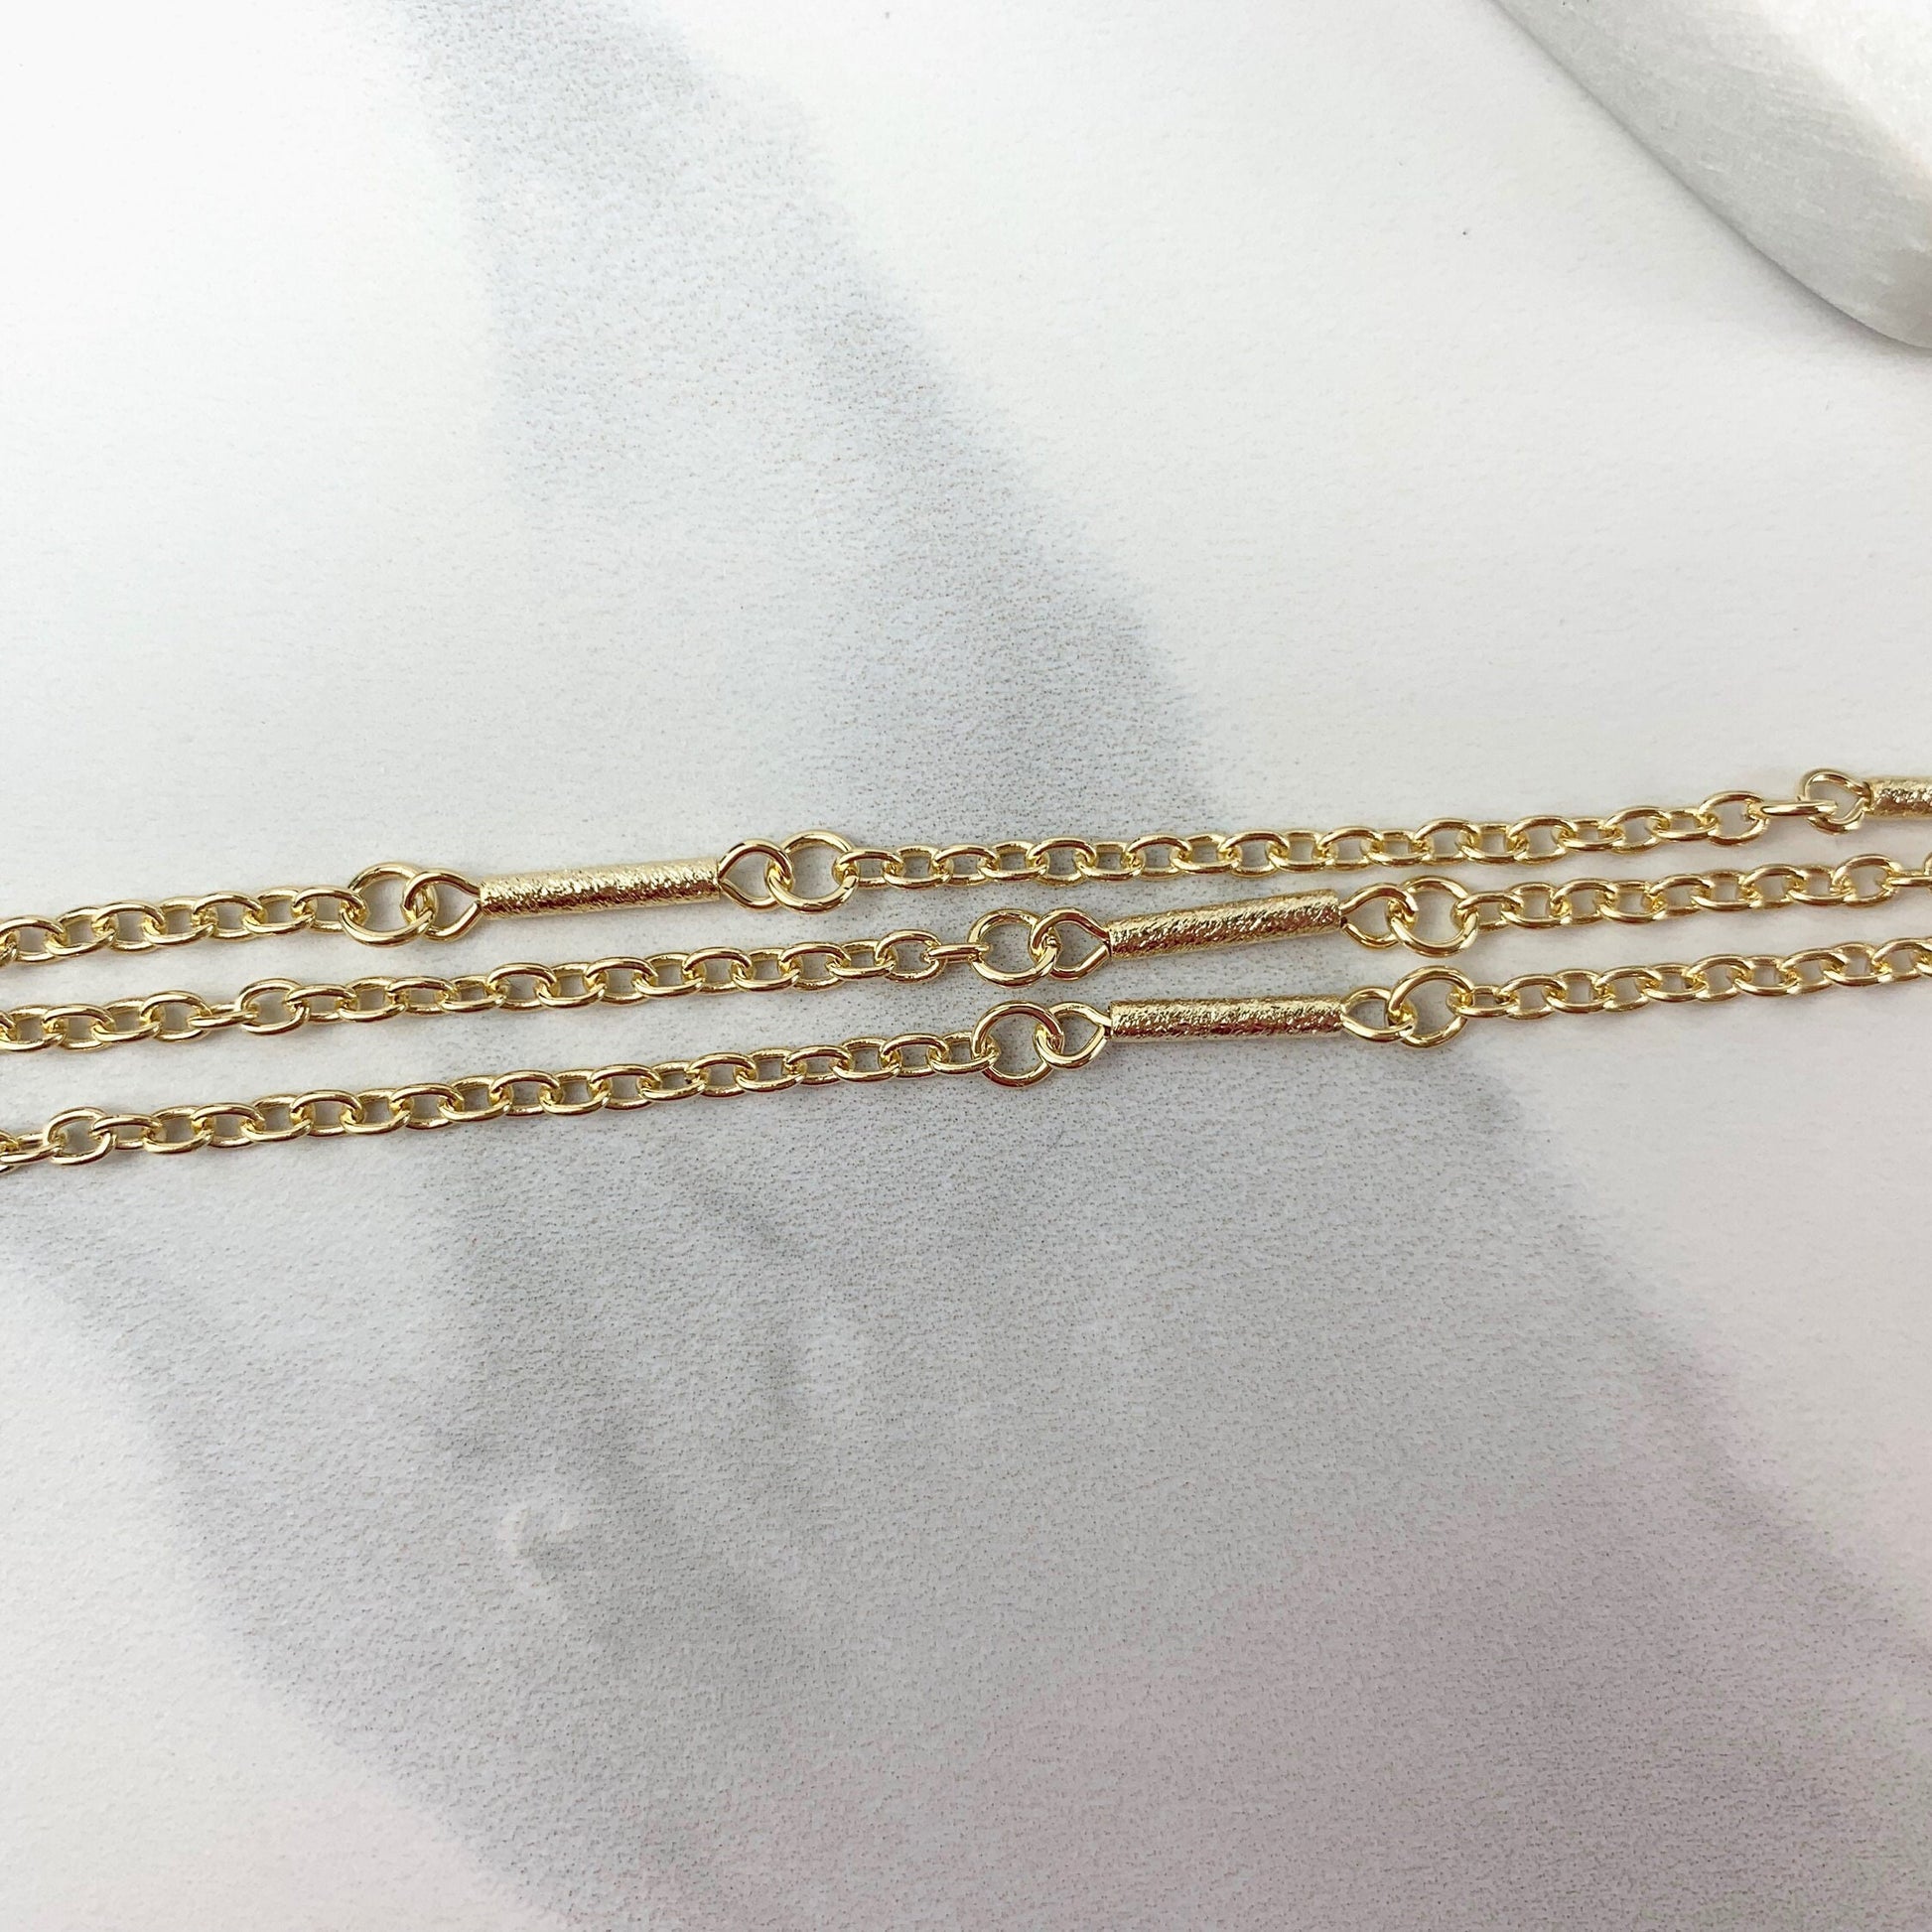 18k Gold Filled 2mm Cable Chain with Three Layers of Chain Anklet Wholesale Jewelry Making Supplies